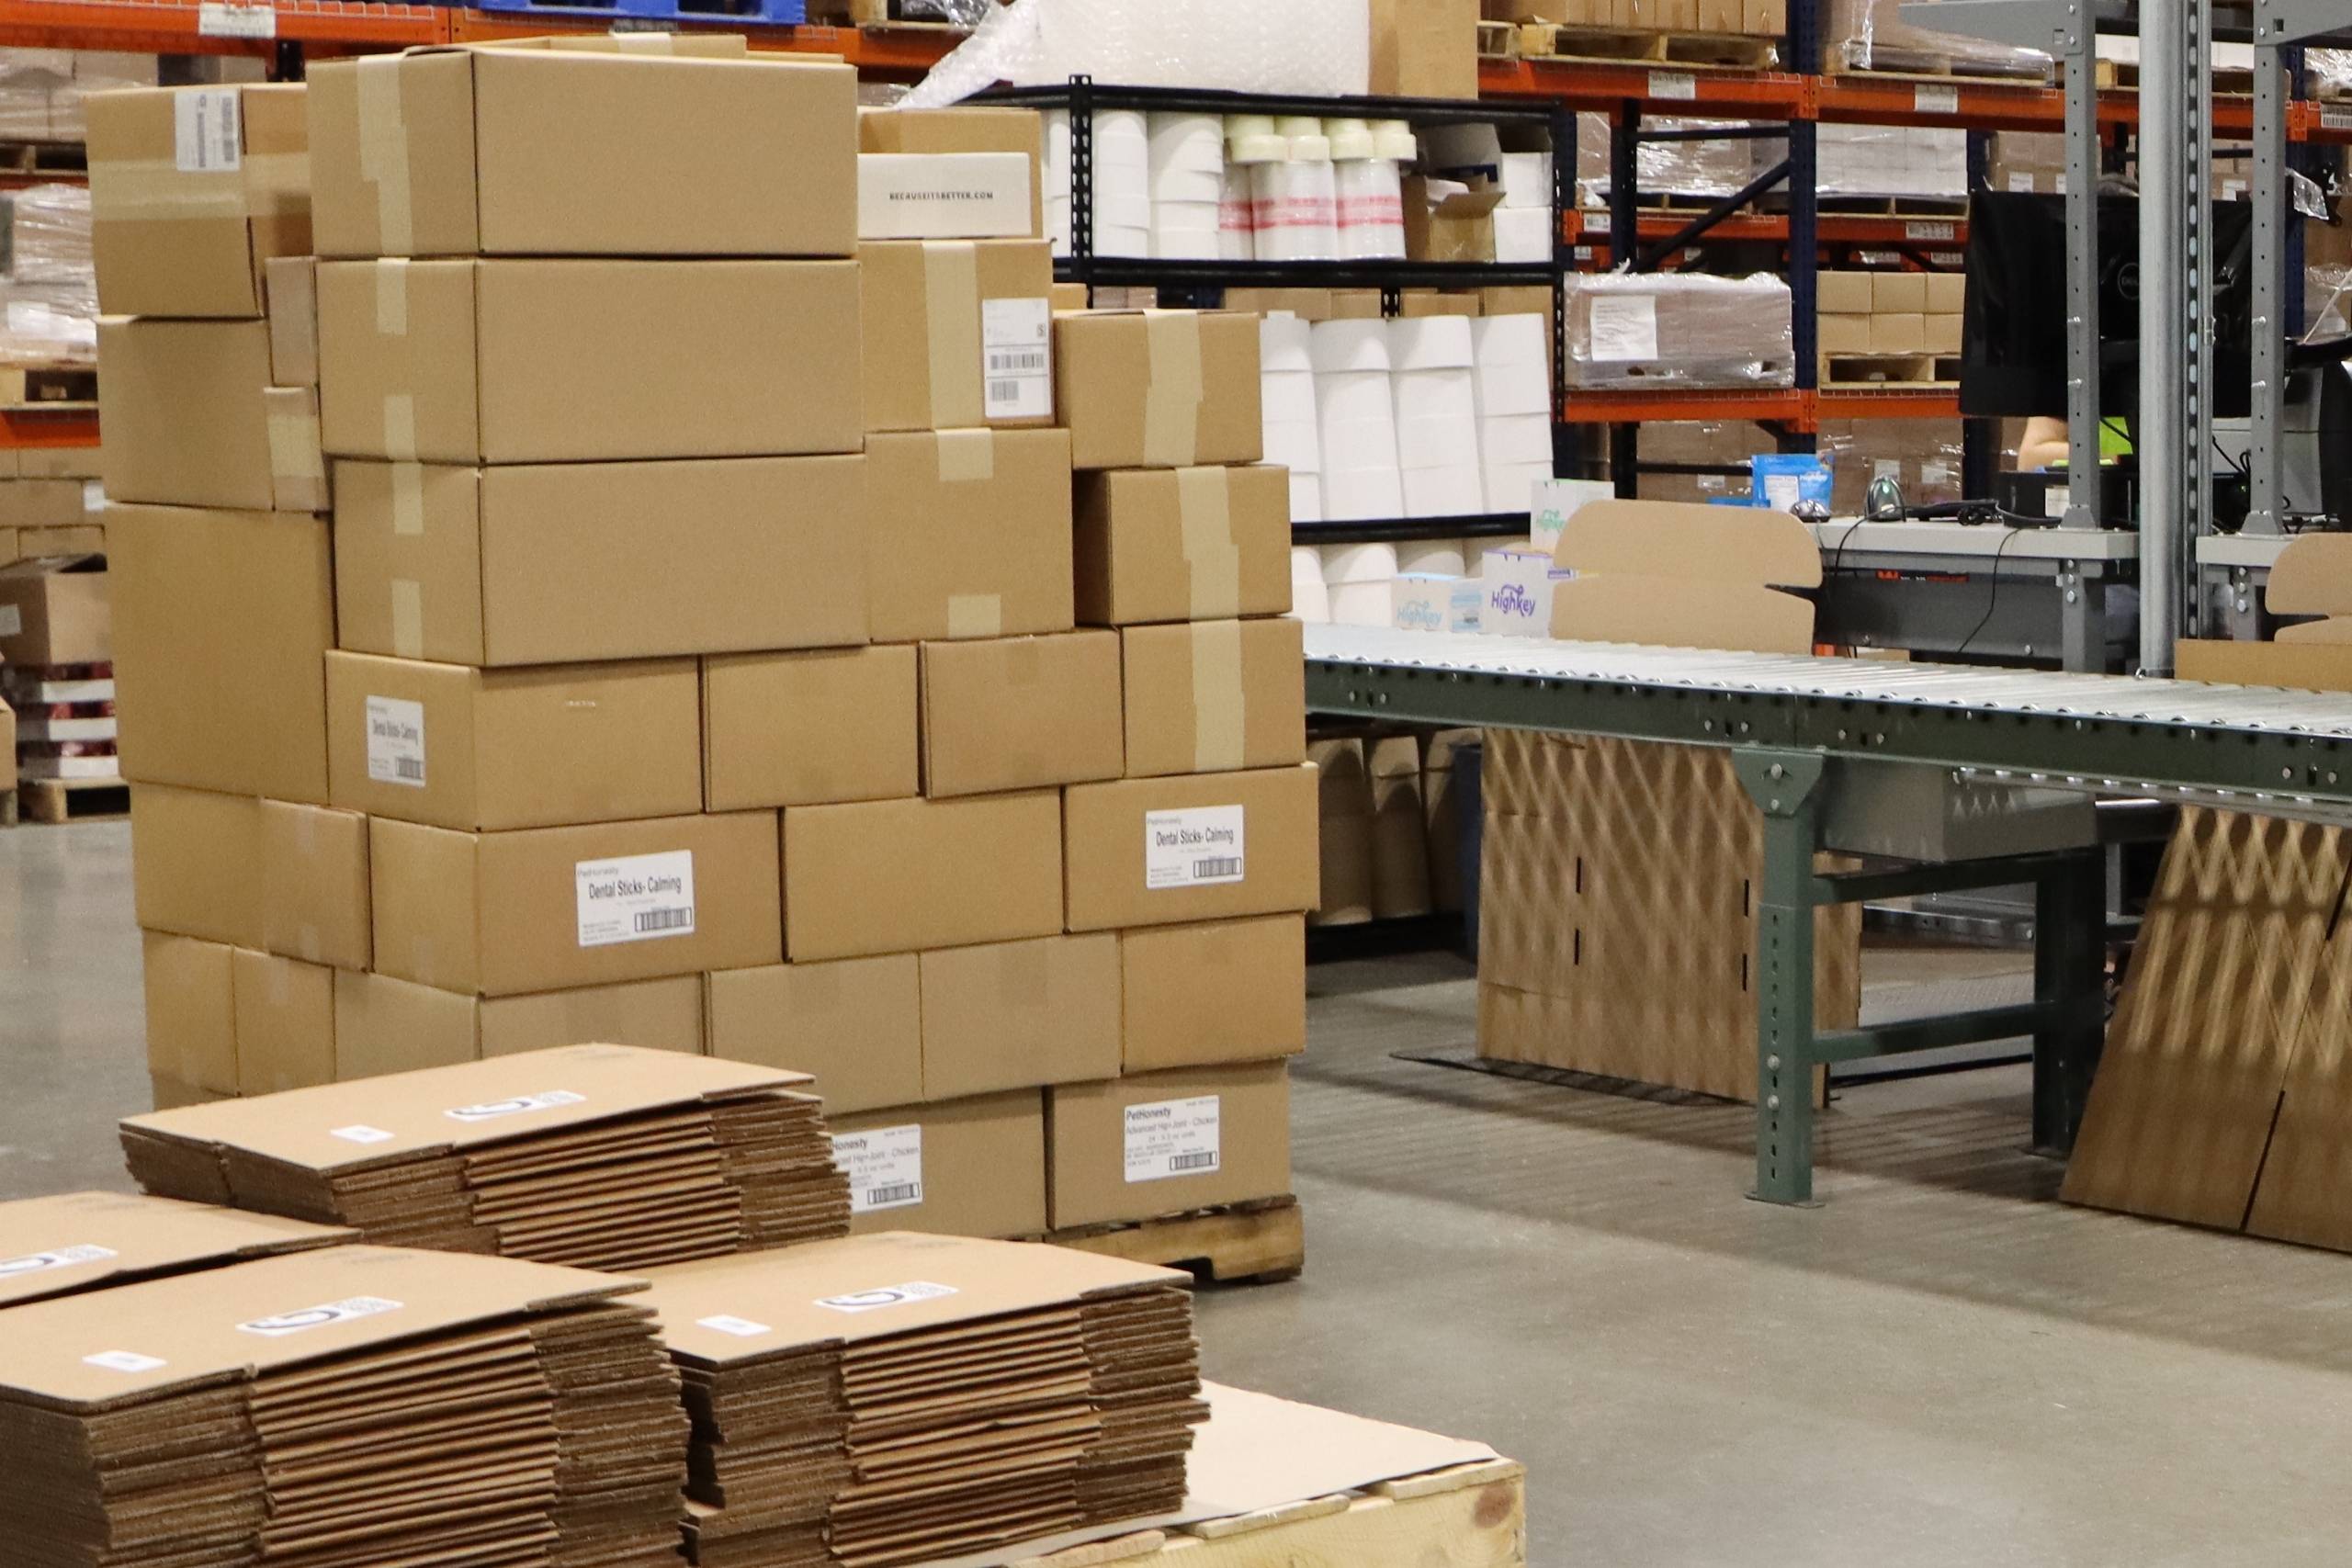 Tips to Get Your Ecommerce Fulfillment Ready for the Holidays